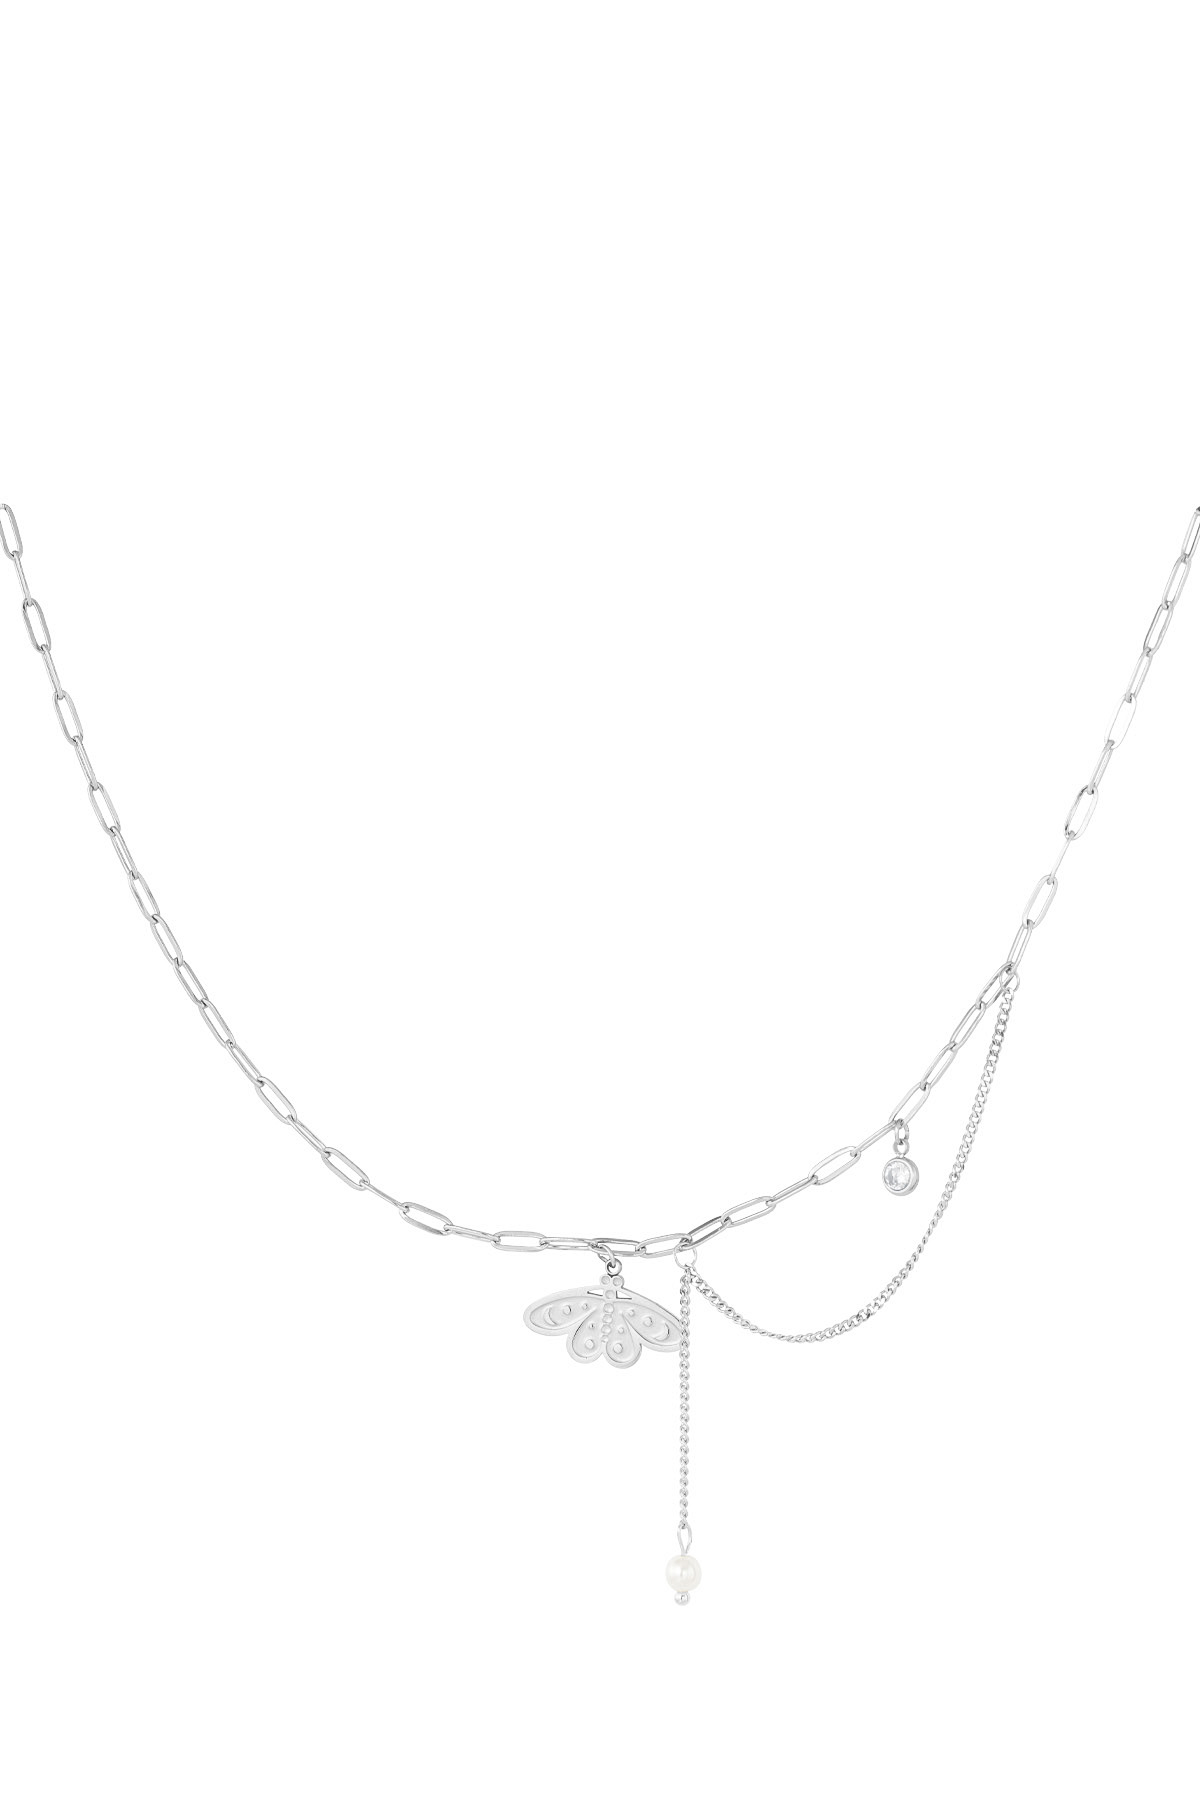 Butterfly charm necklace - silver h5 